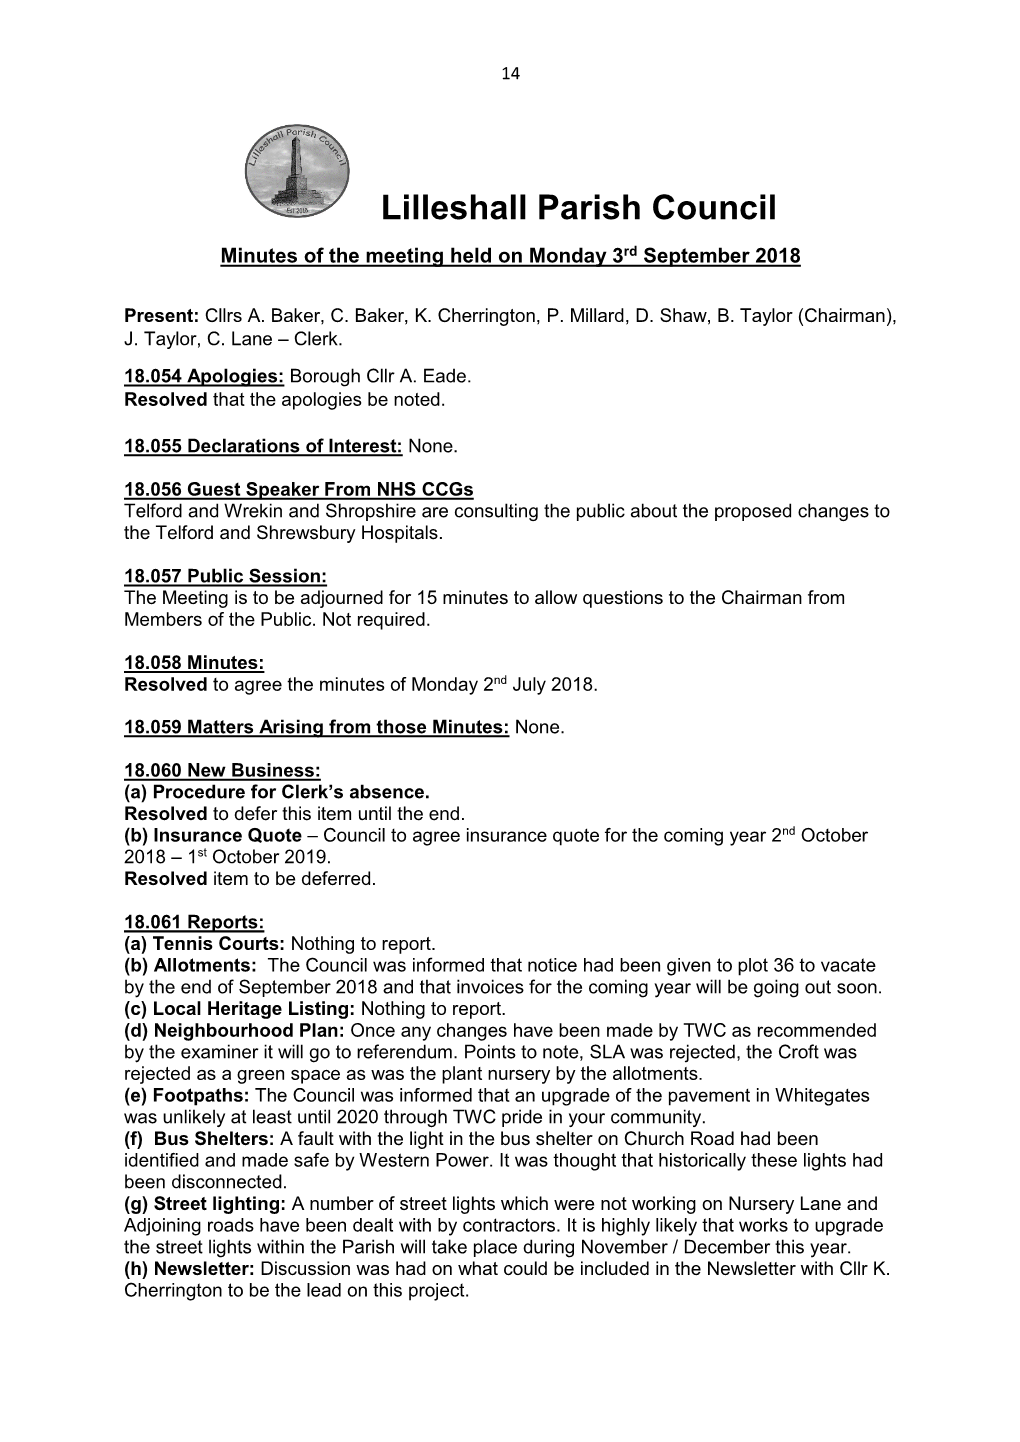 Lilleshall Parish Council Minutes of the Meeting Held on Monday 3Rd September 2018